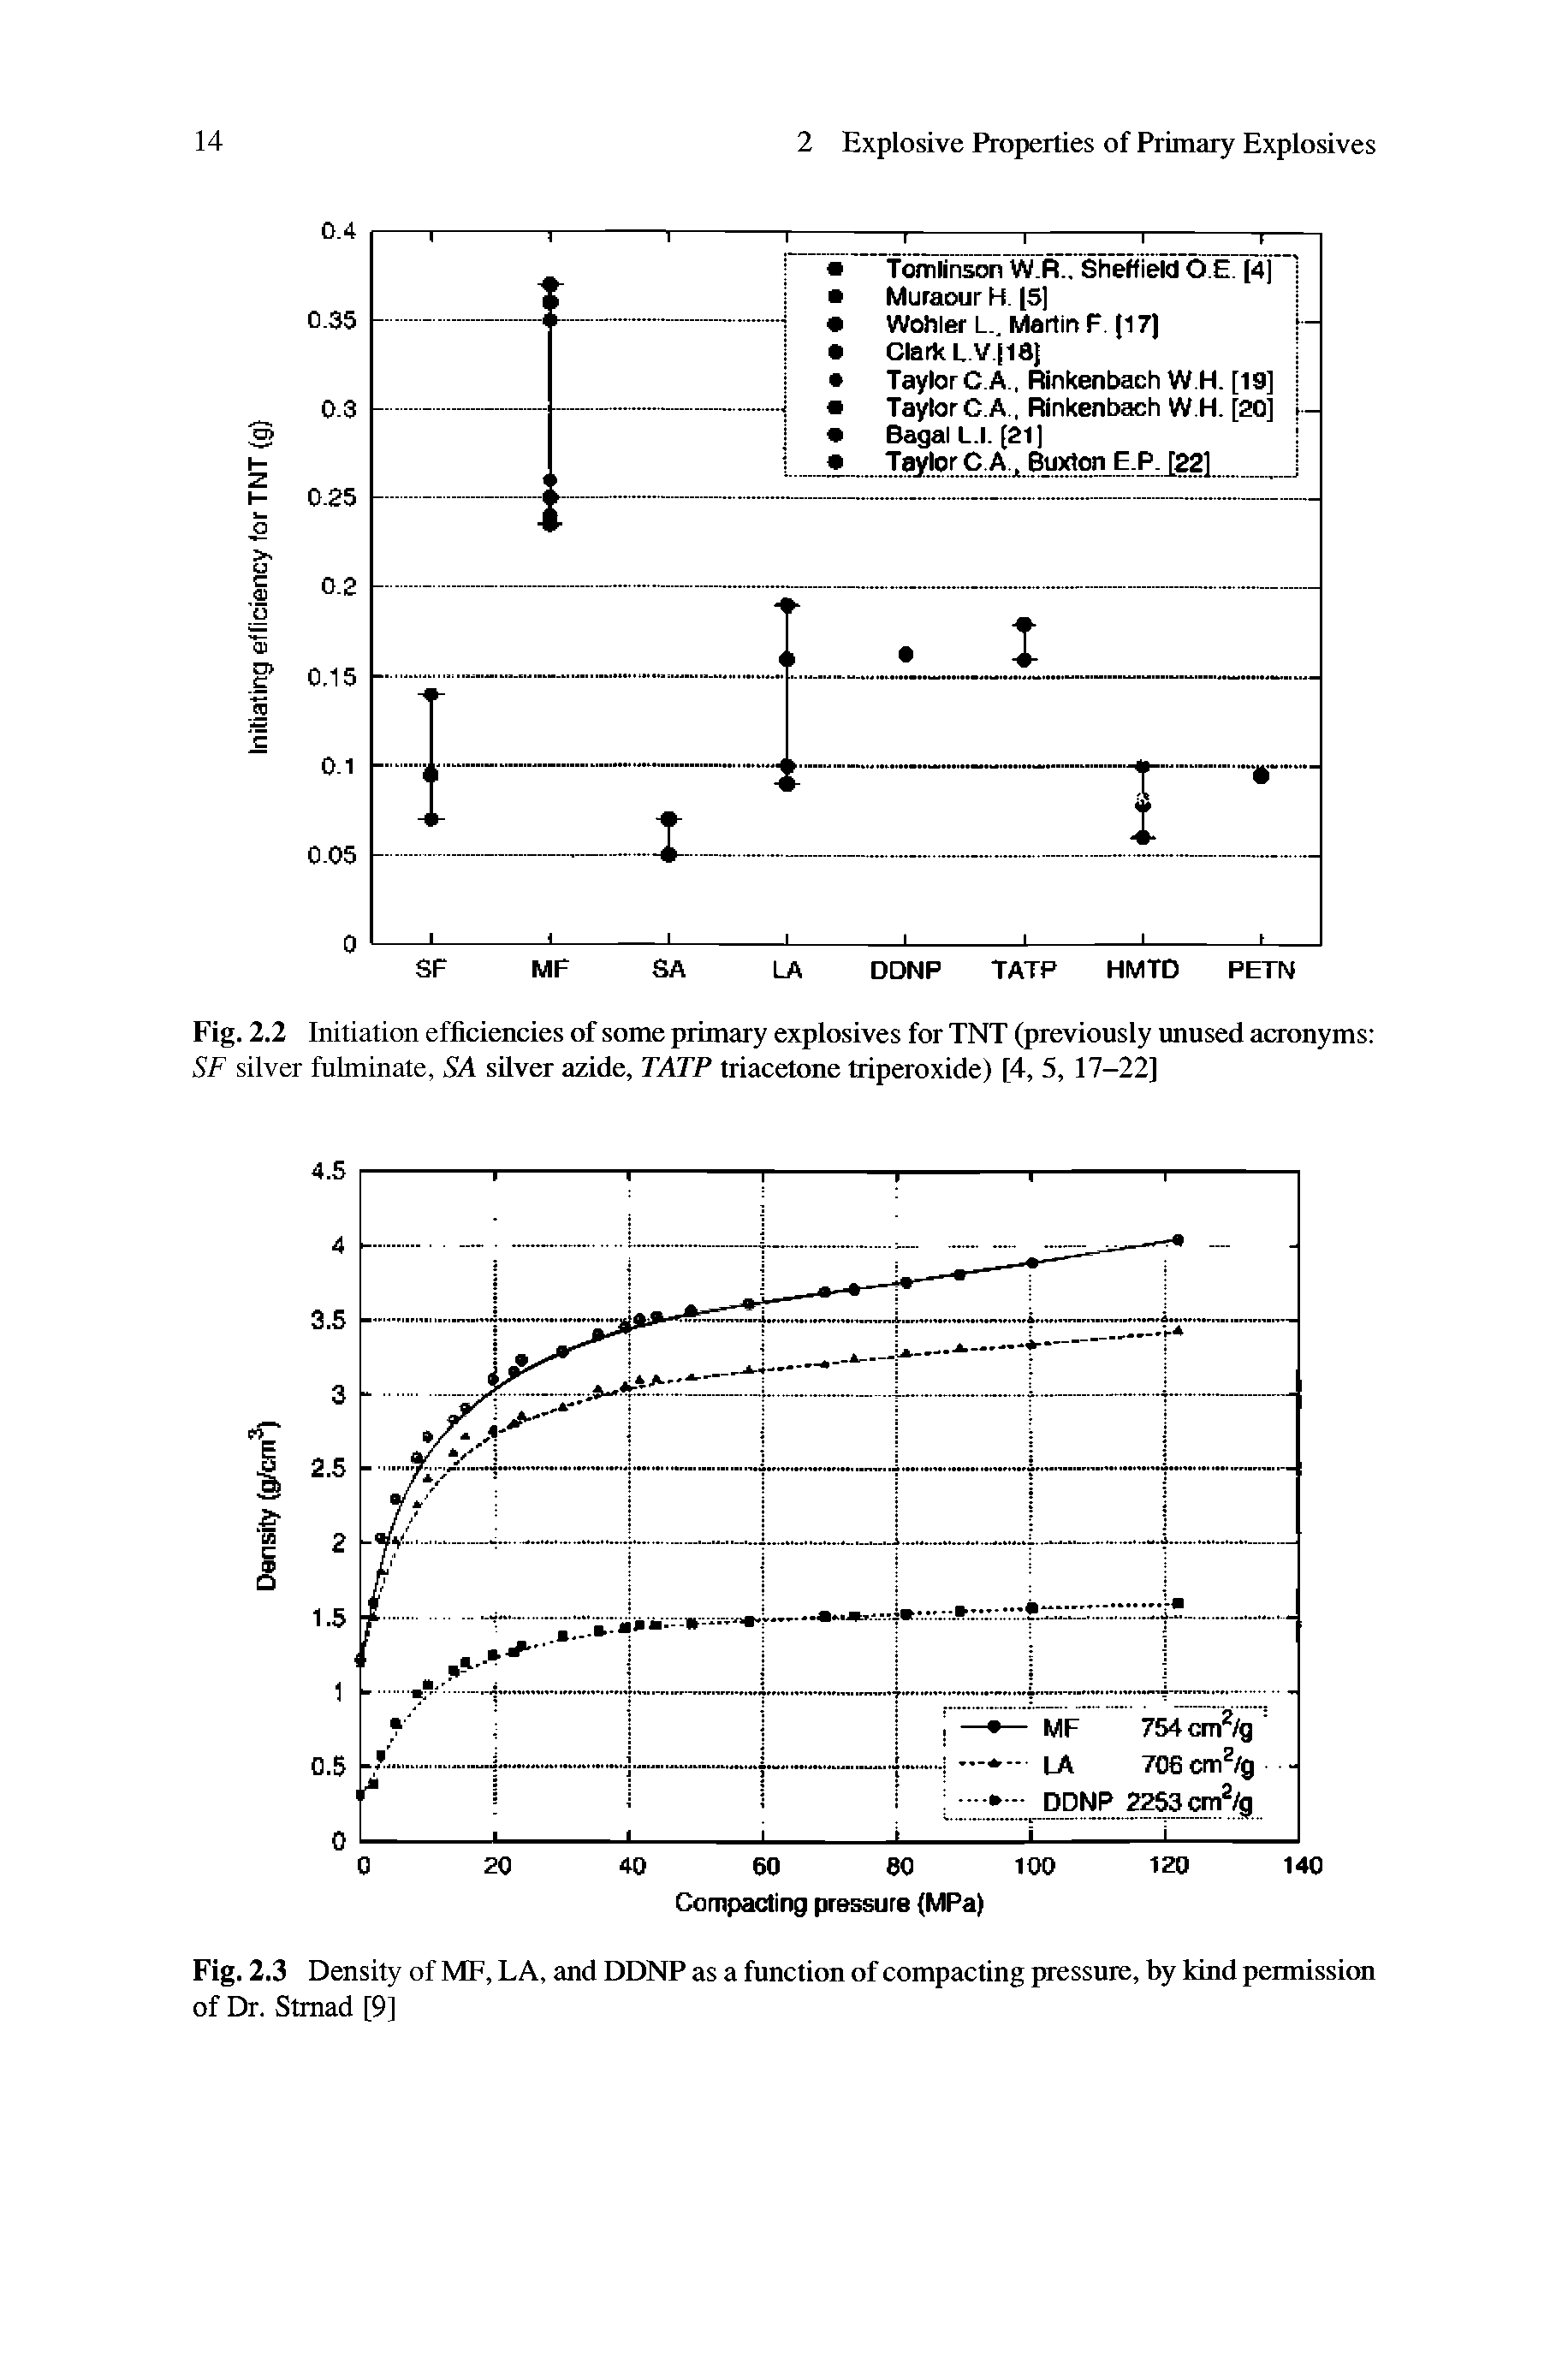 Fig. 2.2 Initiation efficiencies of some primary explosives for TNT (previously unused acronyms SF silver fulminate, SA silver azide, TATP triacetone triperoxide) [4, 5, 17—22]...